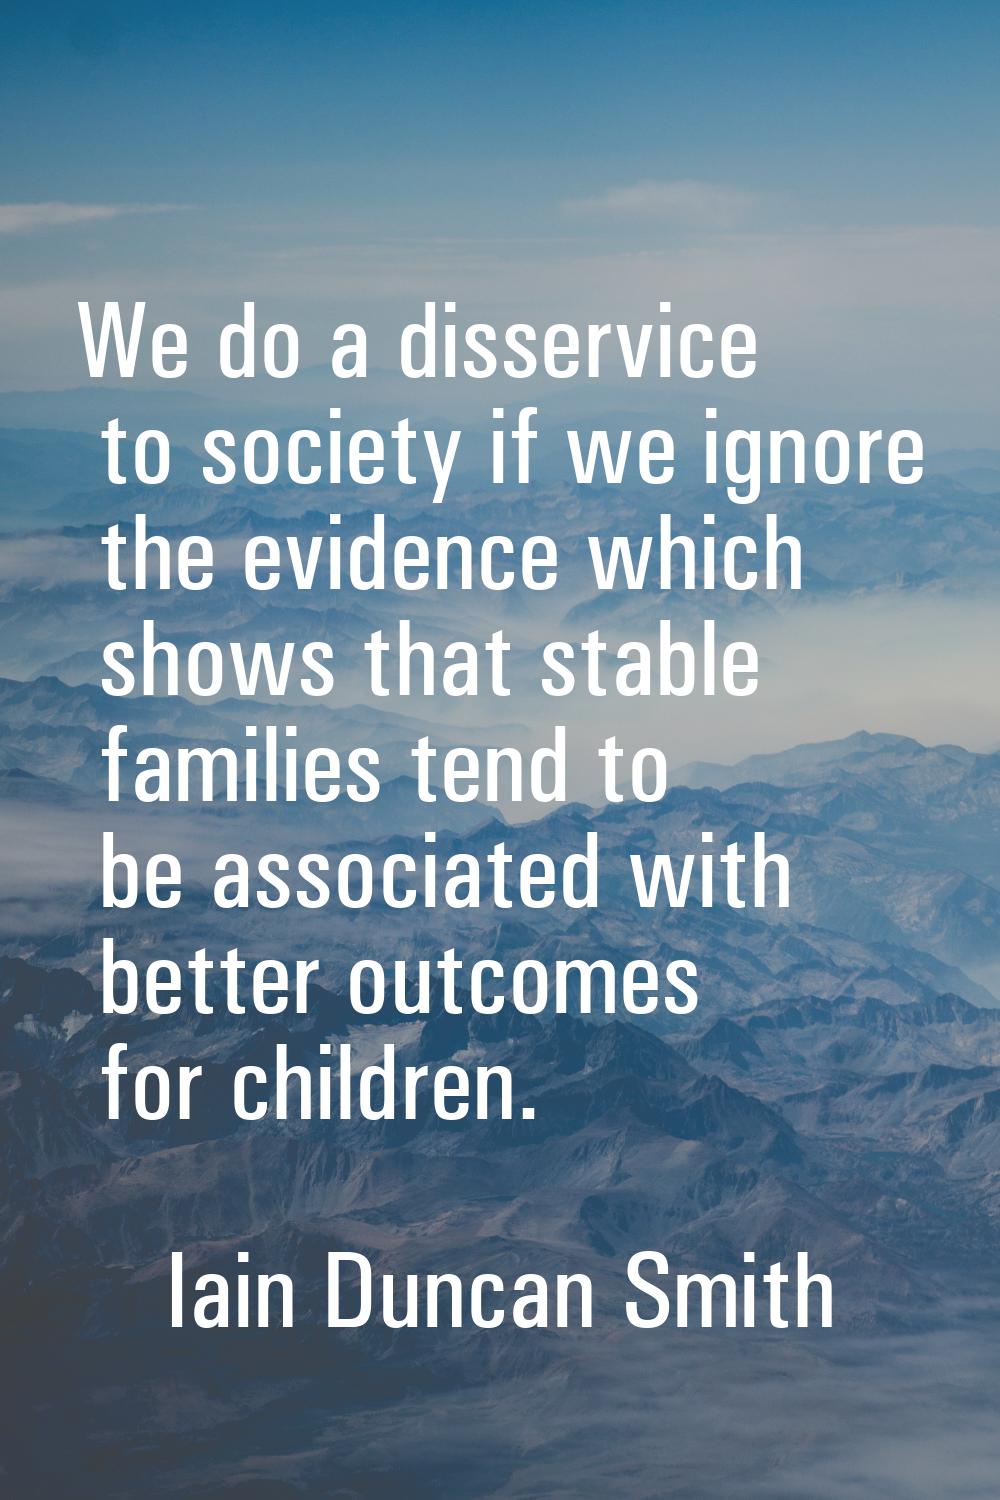 We do a disservice to society if we ignore the evidence which shows that stable families tend to be